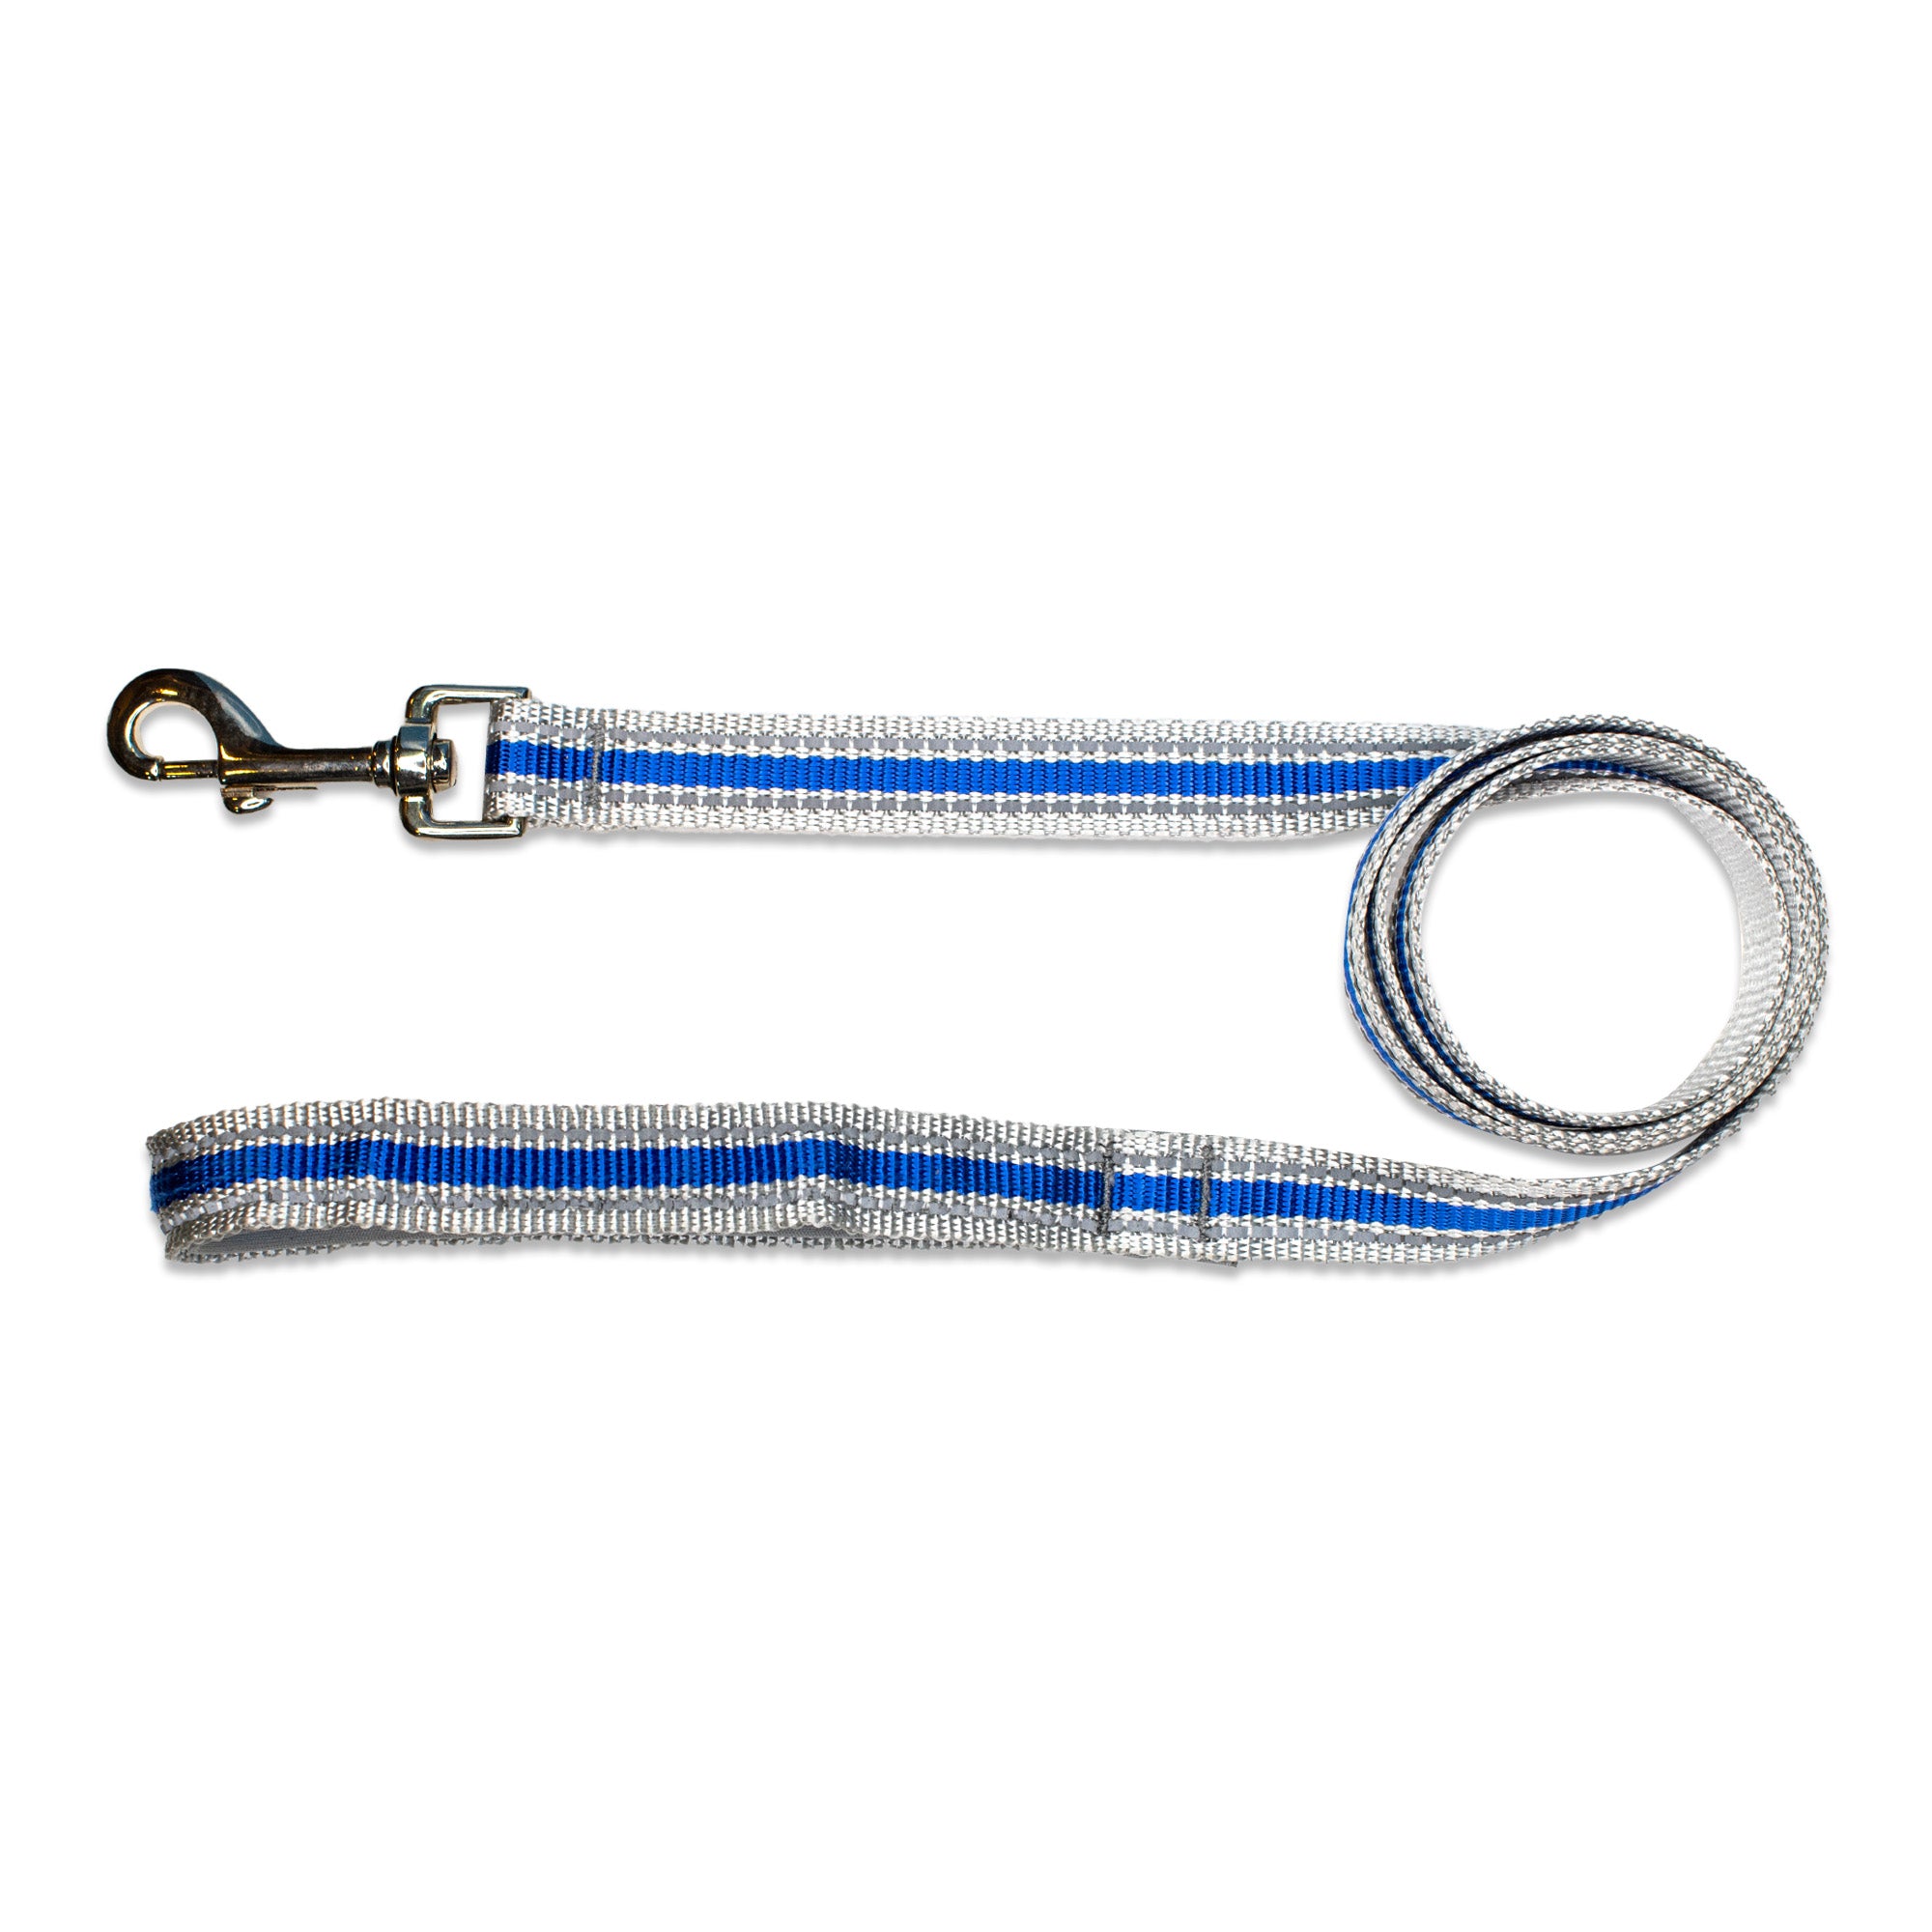 Pawsindia Reflective Nylon Leash for Dogs with a Padded Handle - Blue